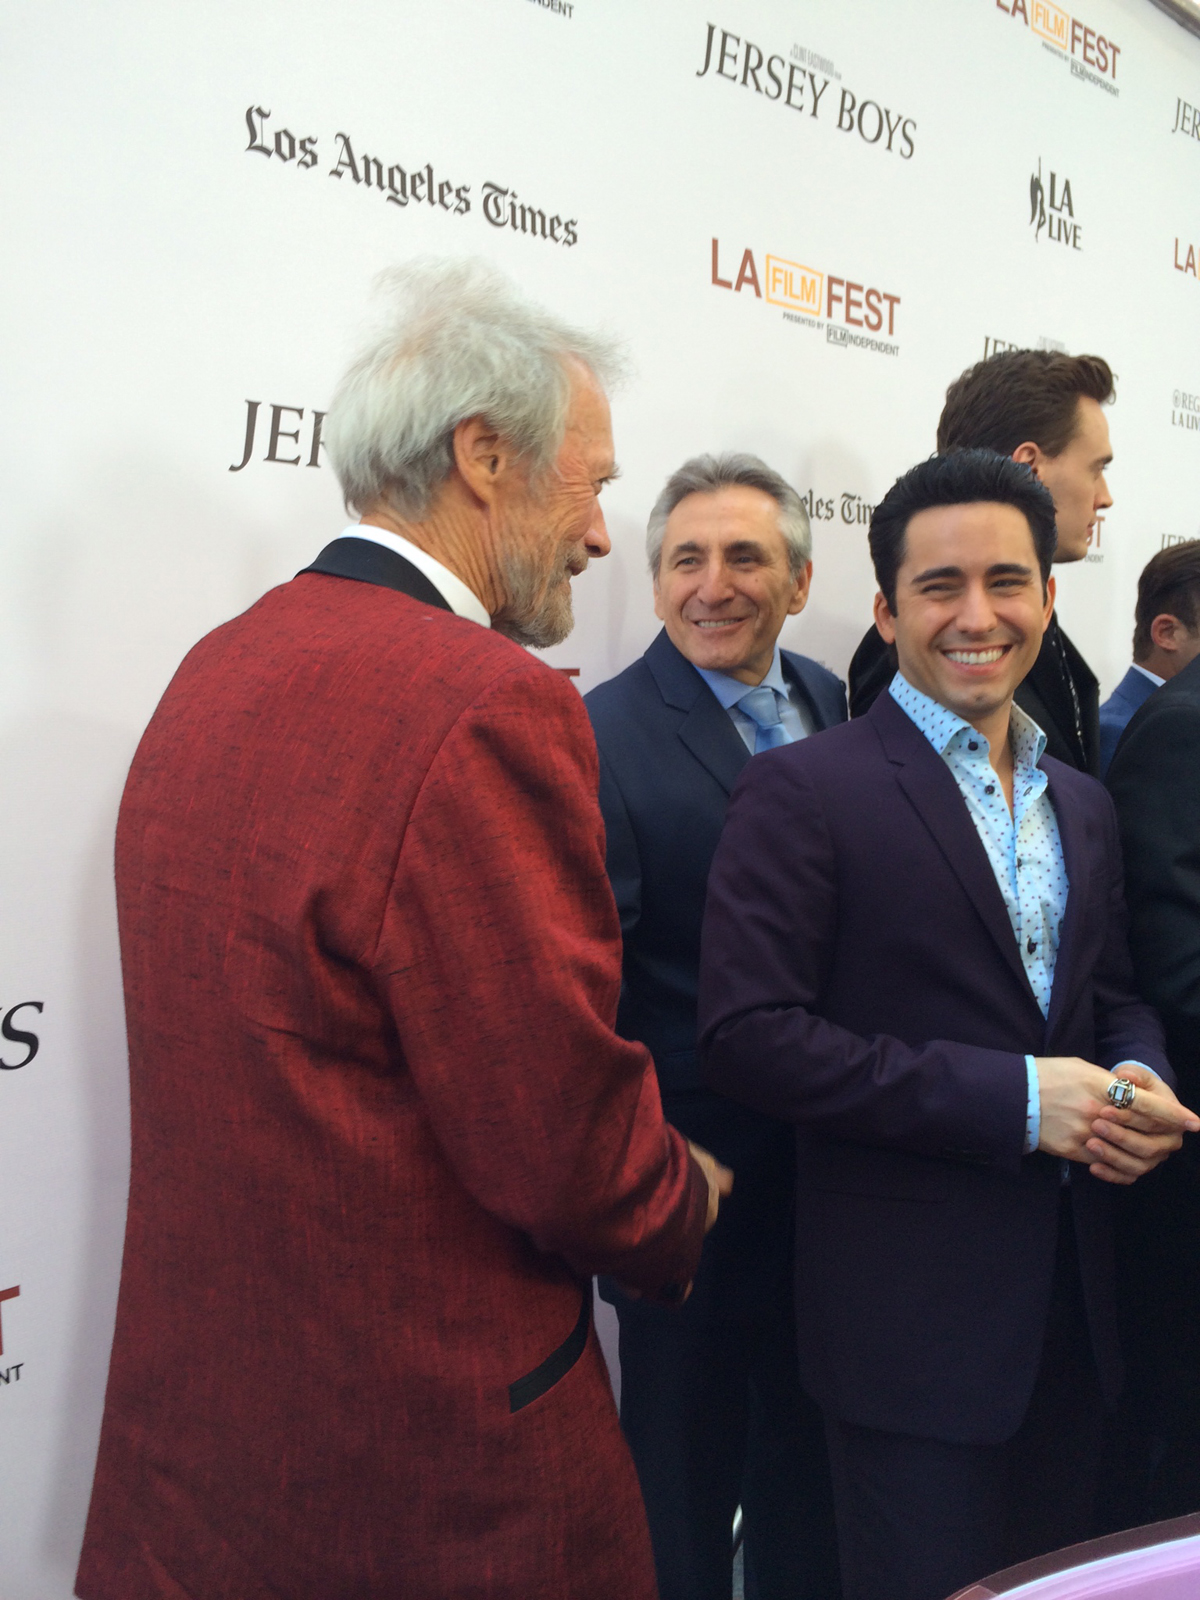 Lou Volpe, Clint Eastwood & John Lloyd Young on red carpet for the Jersey Boys movie premiere.